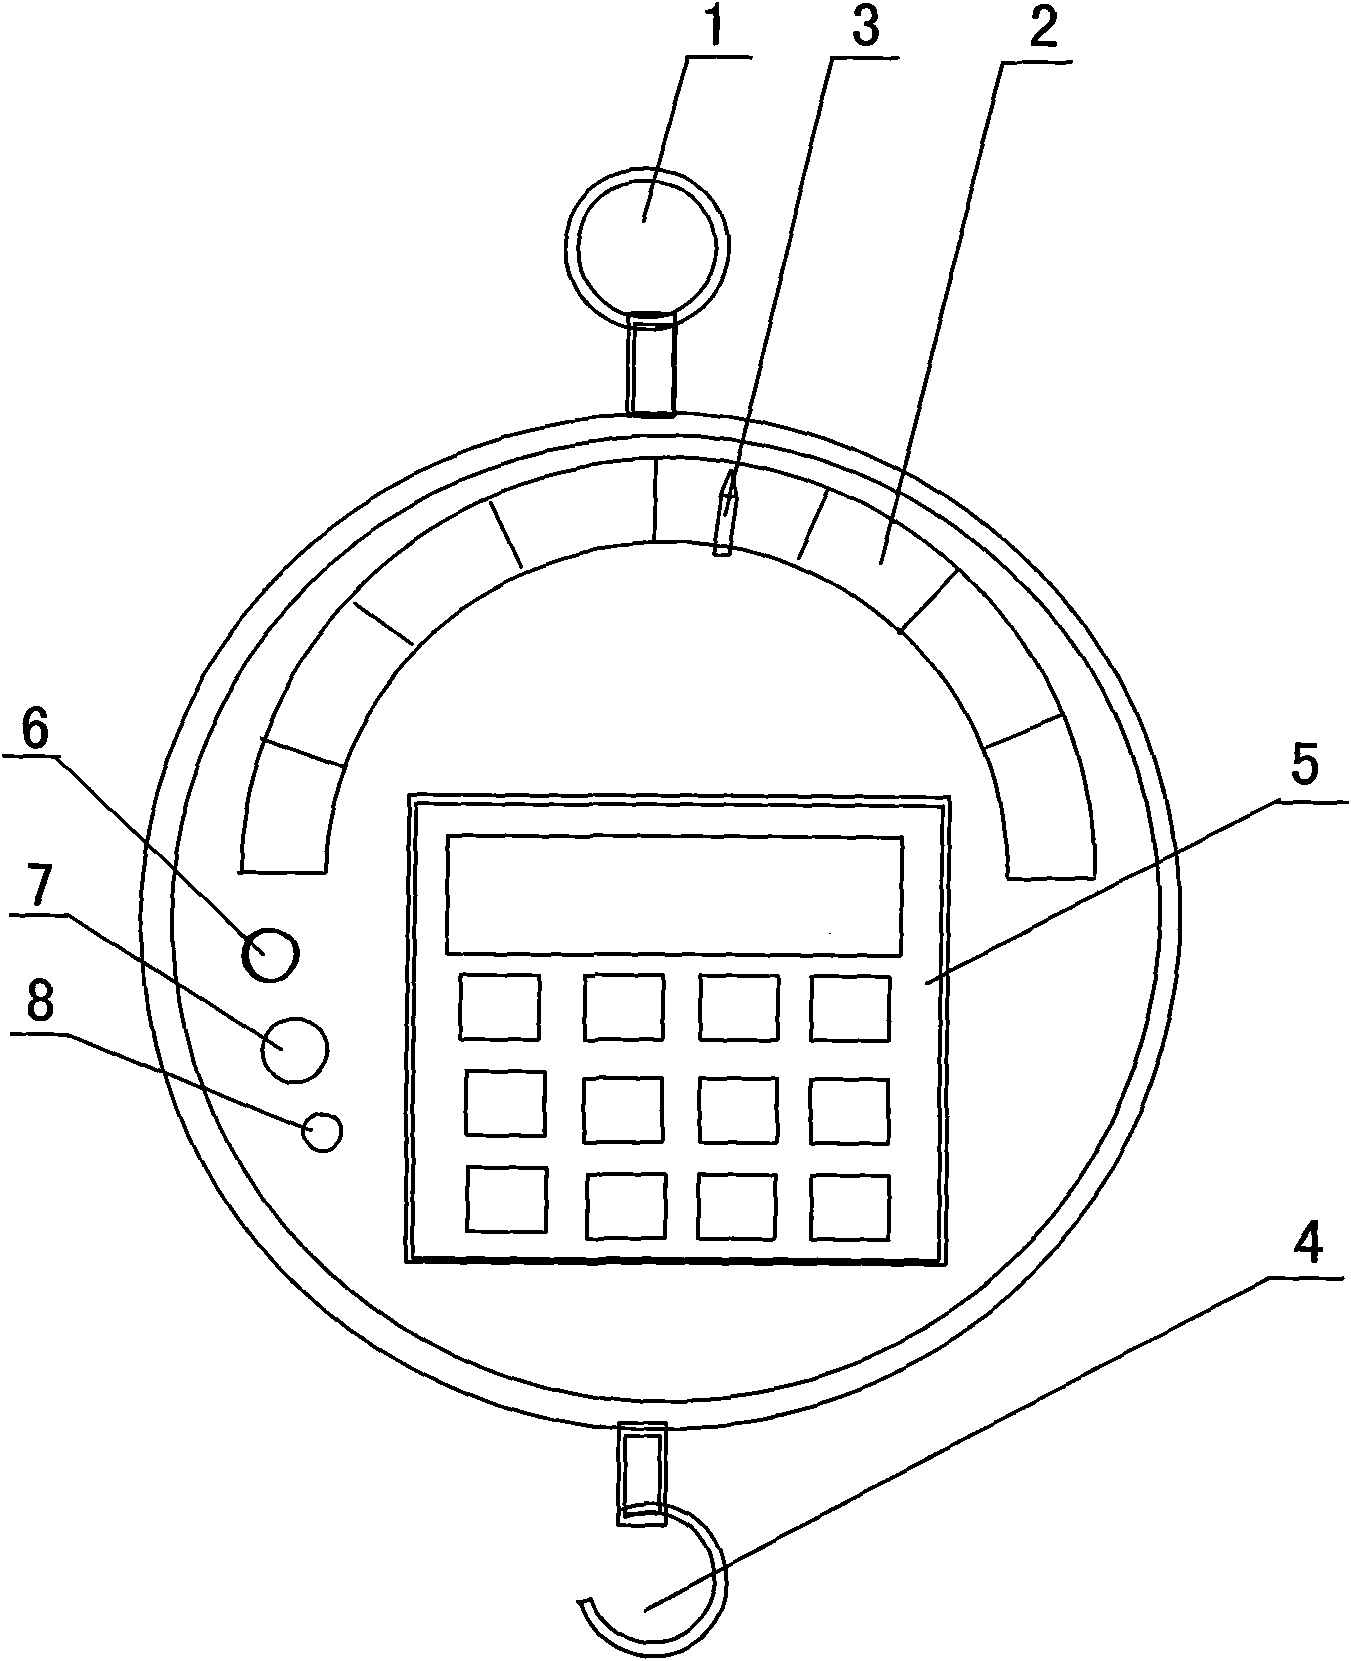 Spring scale with currency detector and counter